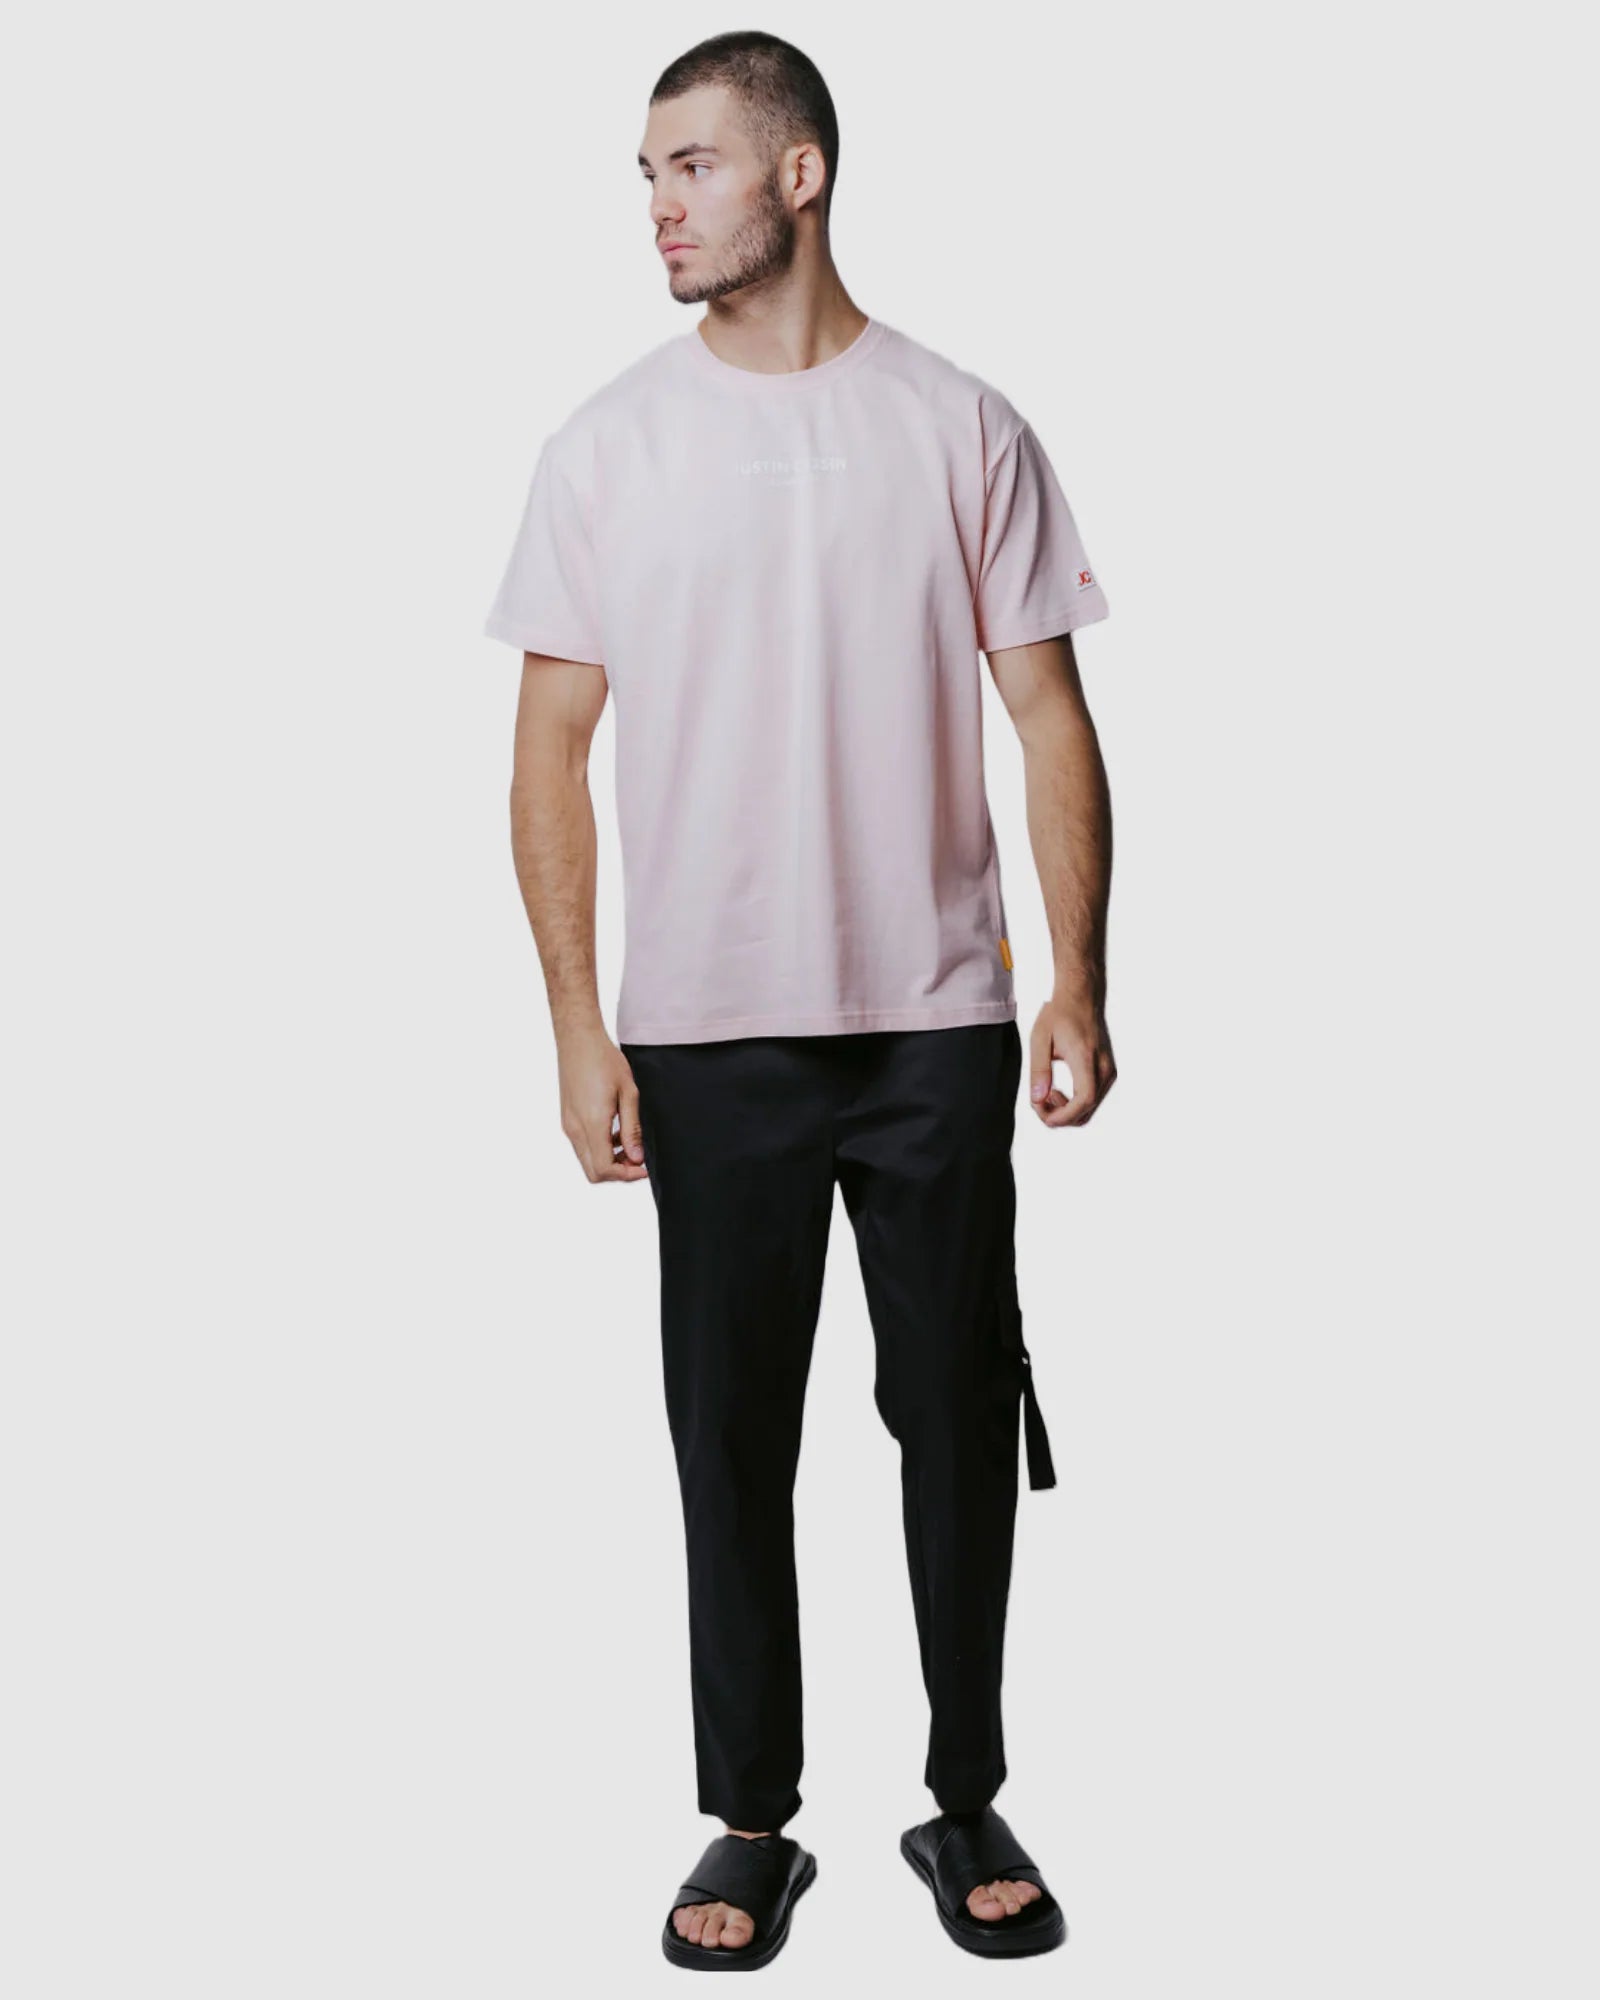 Justin Cassin Essential T-Shirt in Dusty Pink Color 6